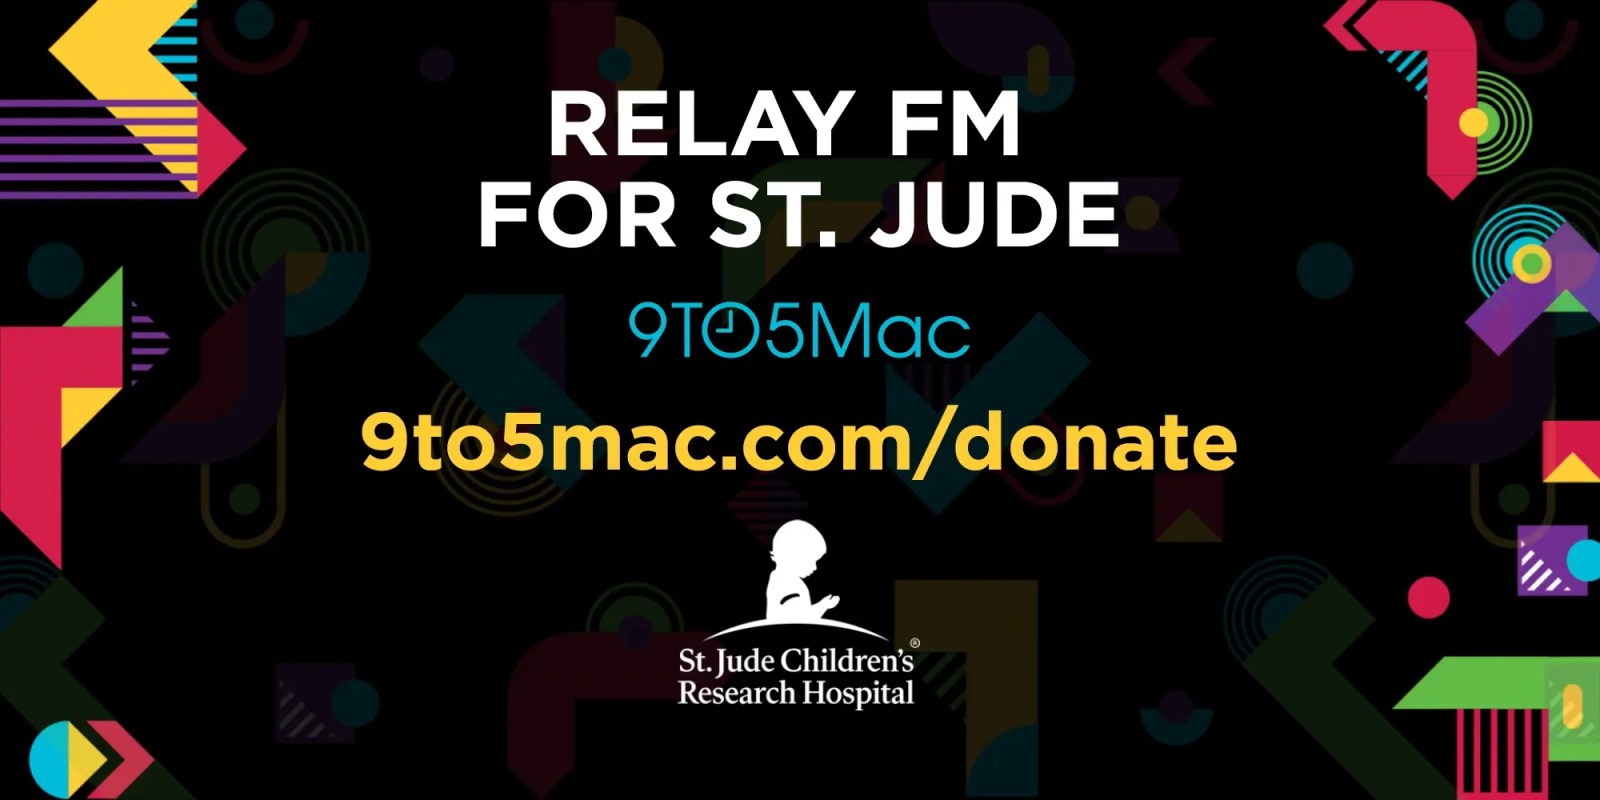 Relay FM launches annual St. Jude fundraiser, and you can earn 9to5Mac rewards for your support